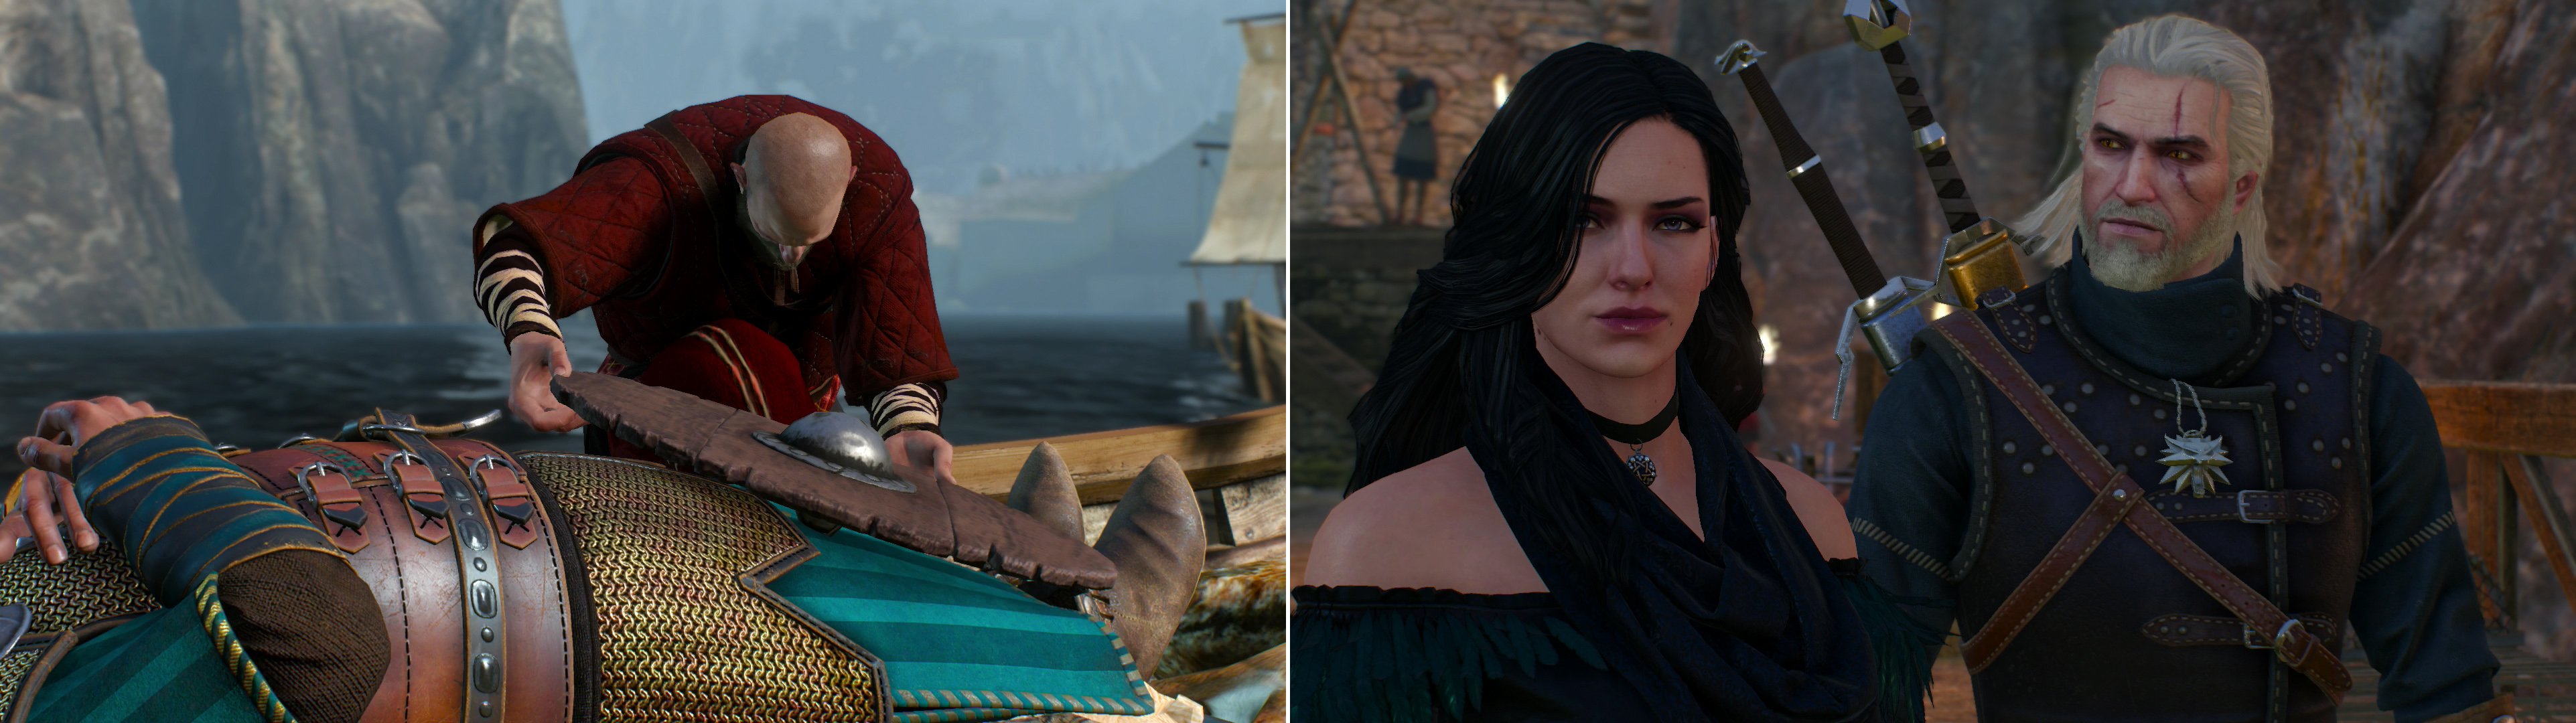 The Skelligers pay their respects to their late king (left) and Geralt reunites with Yennefer (right).